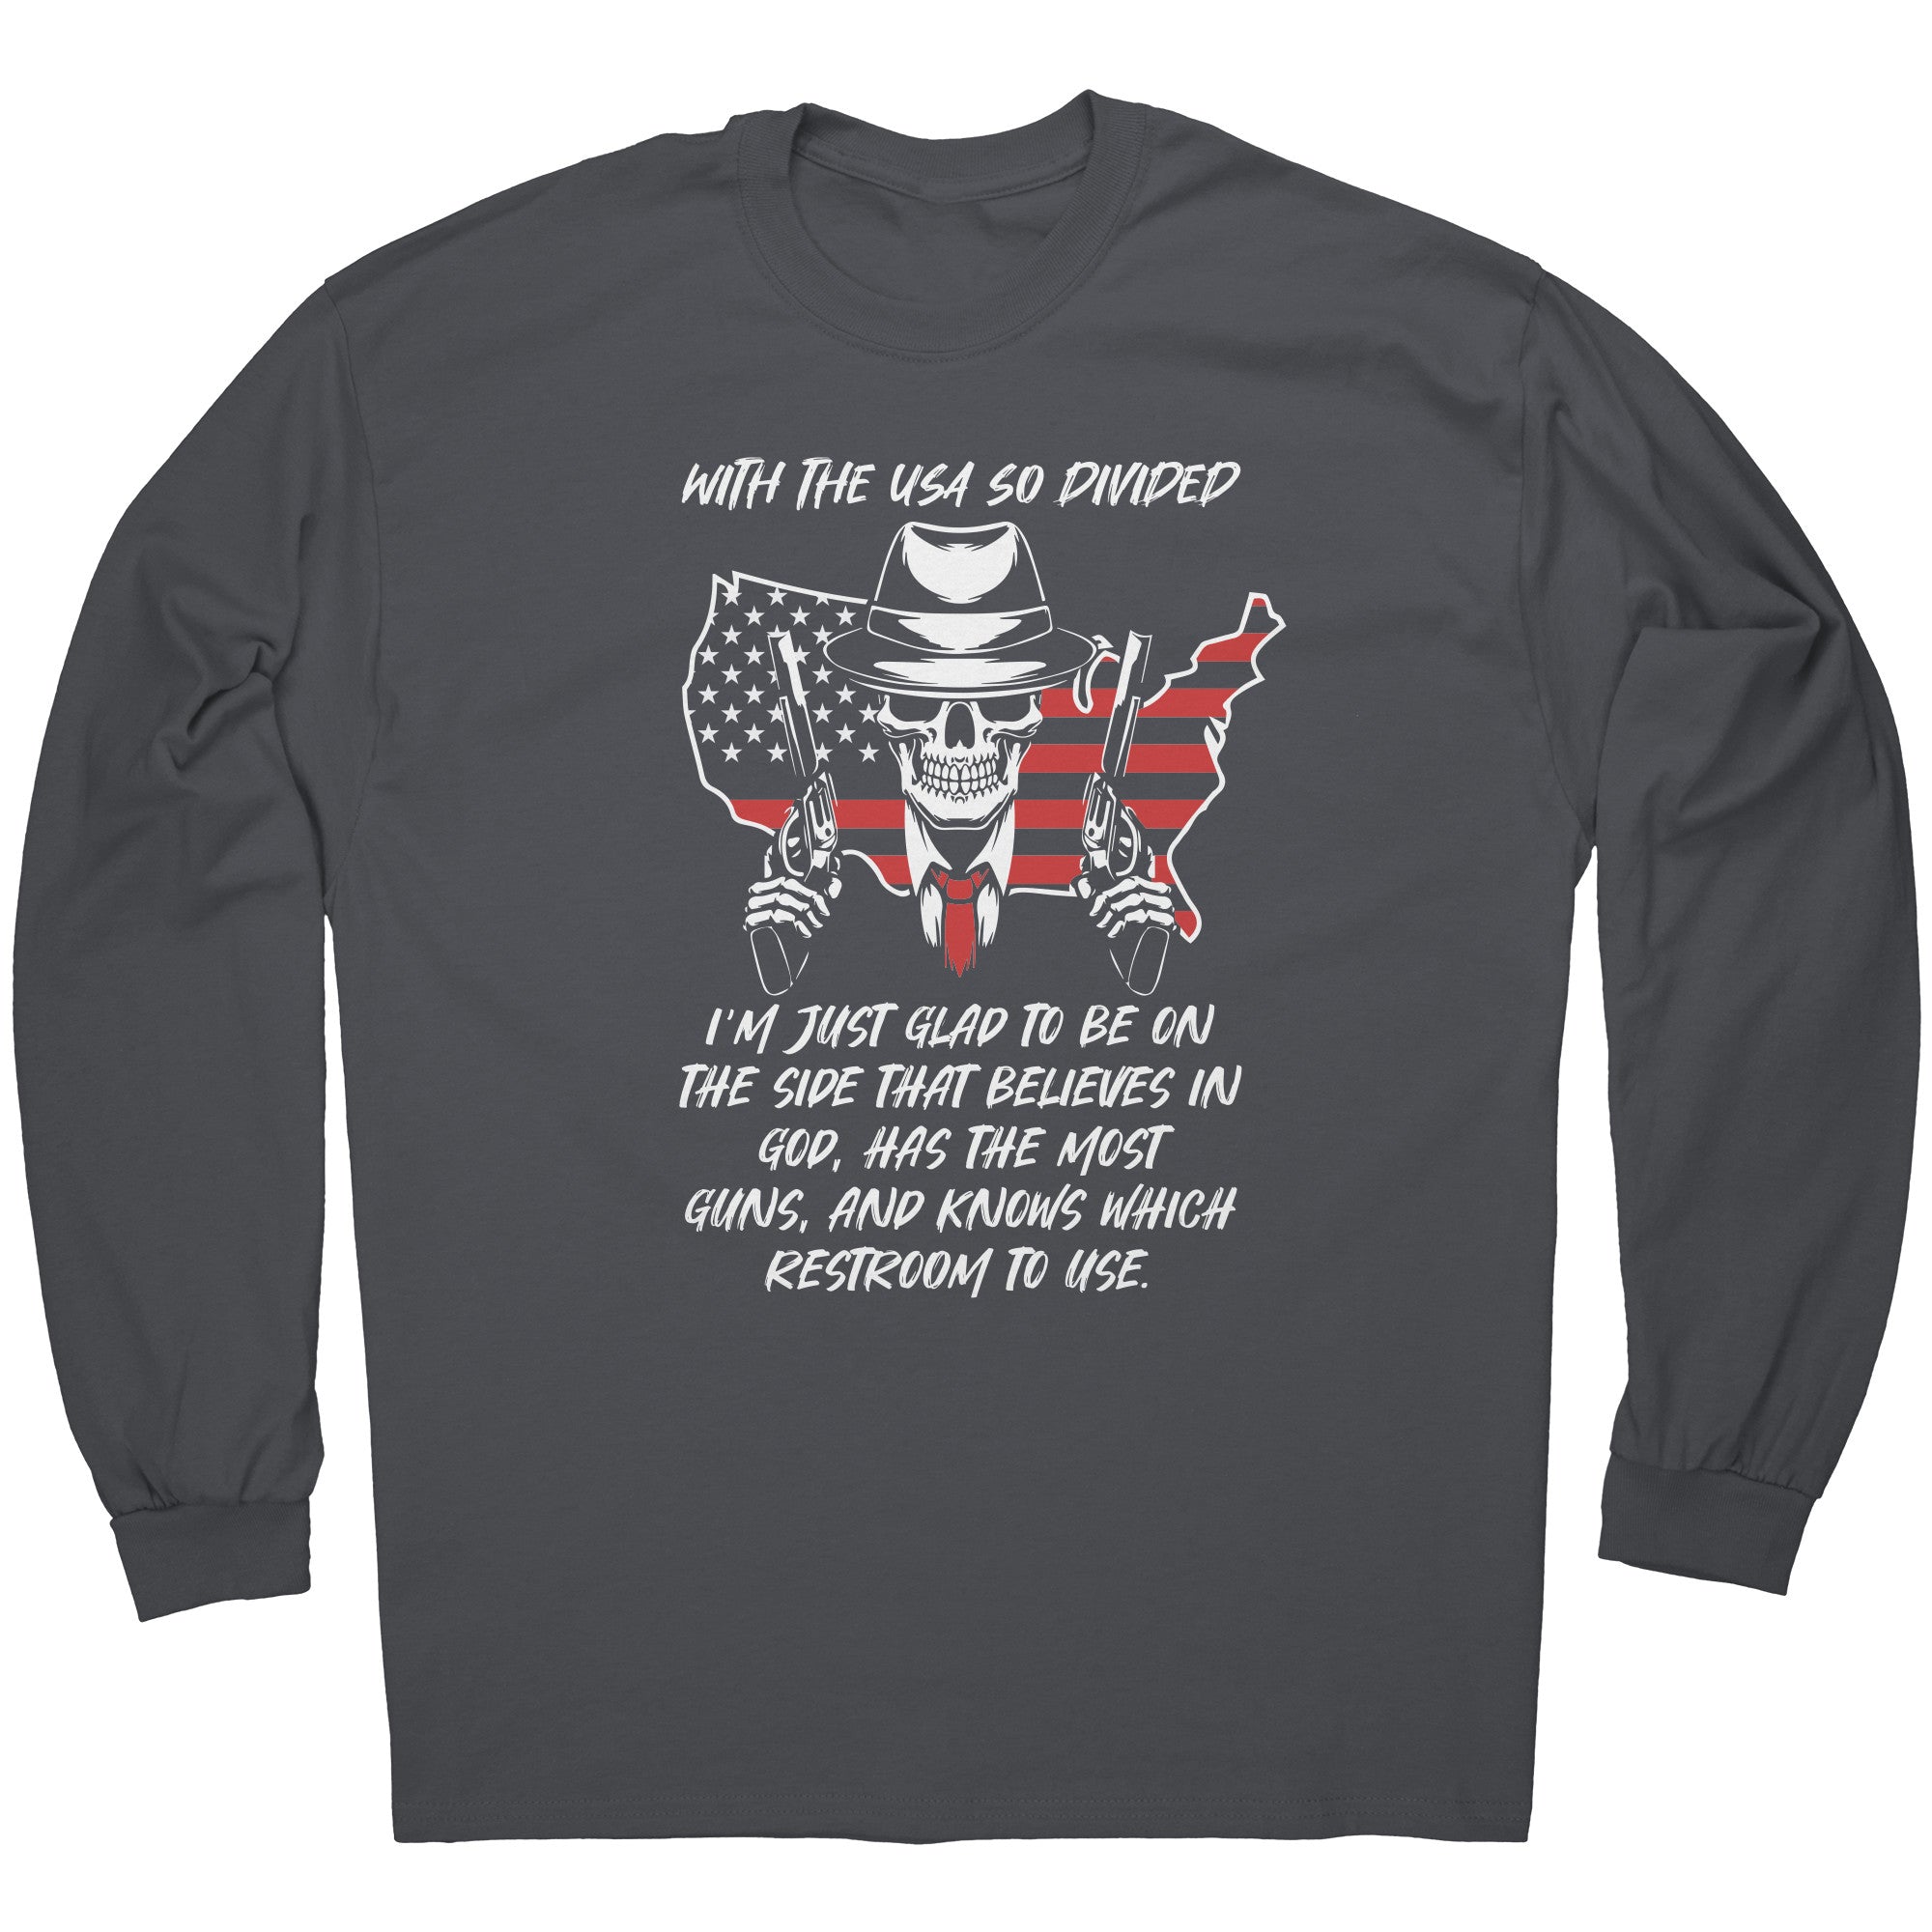 With The USA So Divided I'm Just Glad To Be On The Side That Believes In God, Has The Most Guns, And Knows Which Restroom To Use -Apparel | Drunk America 